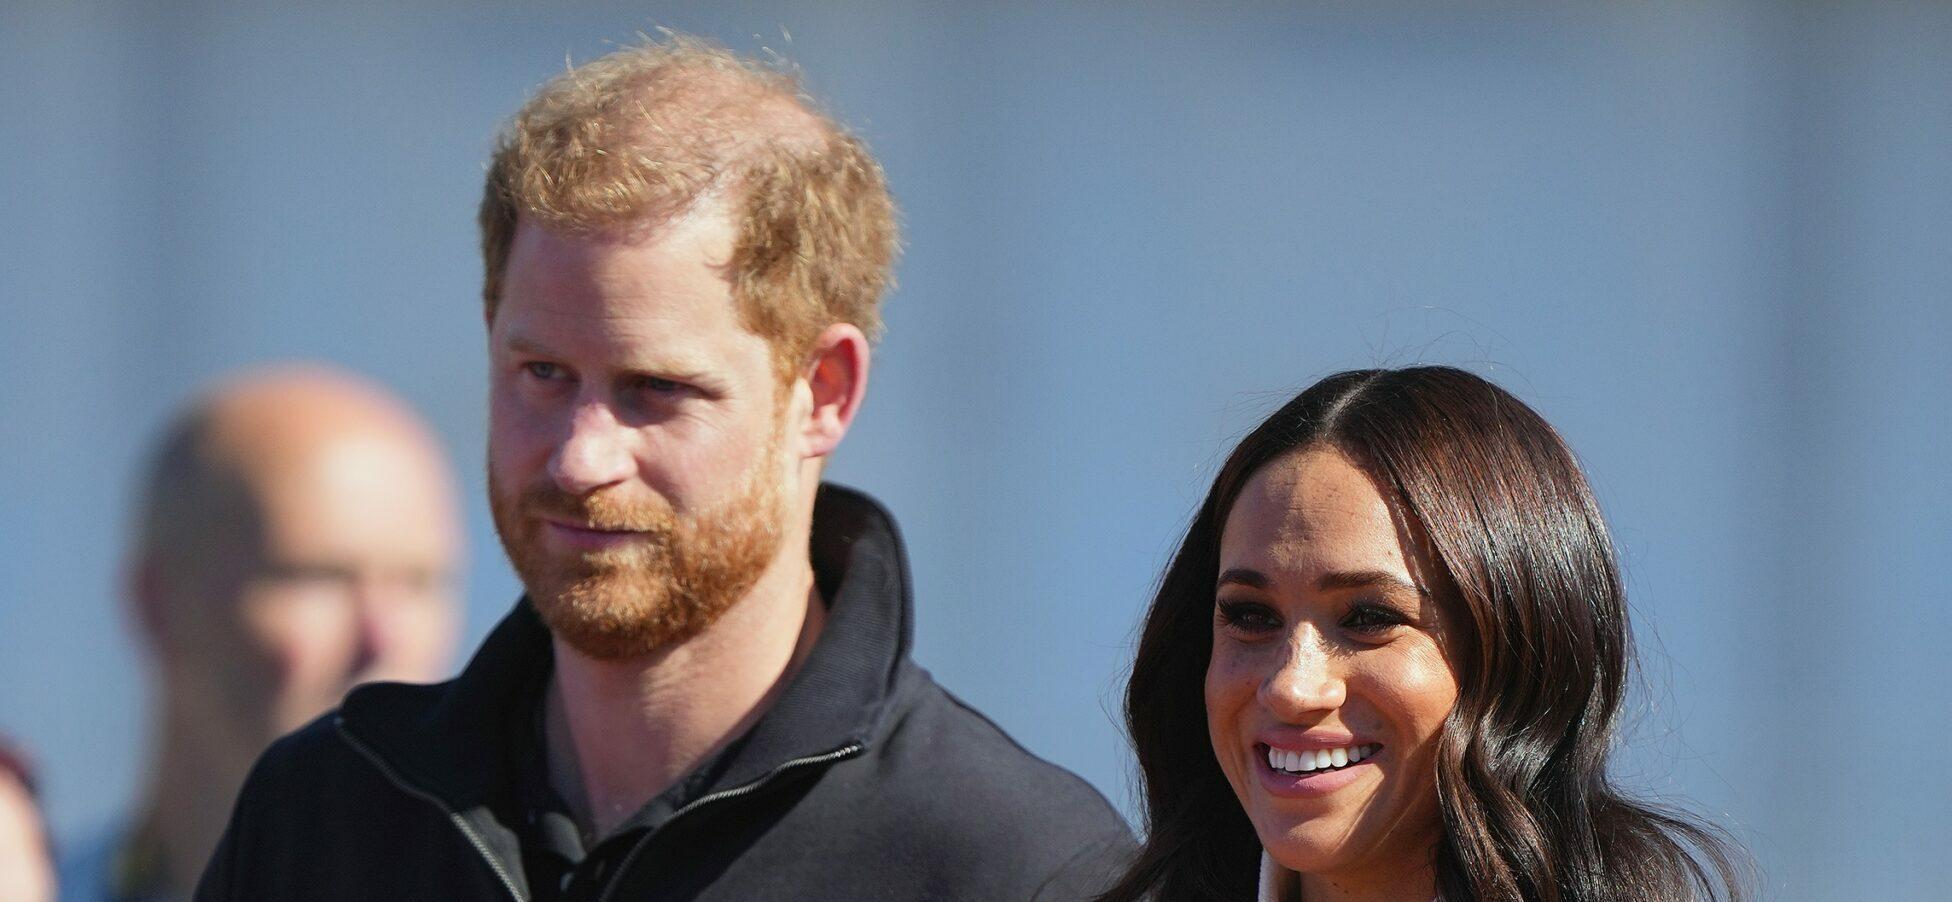 Harry and Meghan attend Day Two of The Invictus GamesThe Duke and Duchess of Sussex watch the Athletics on Day Two of the Invictus Games